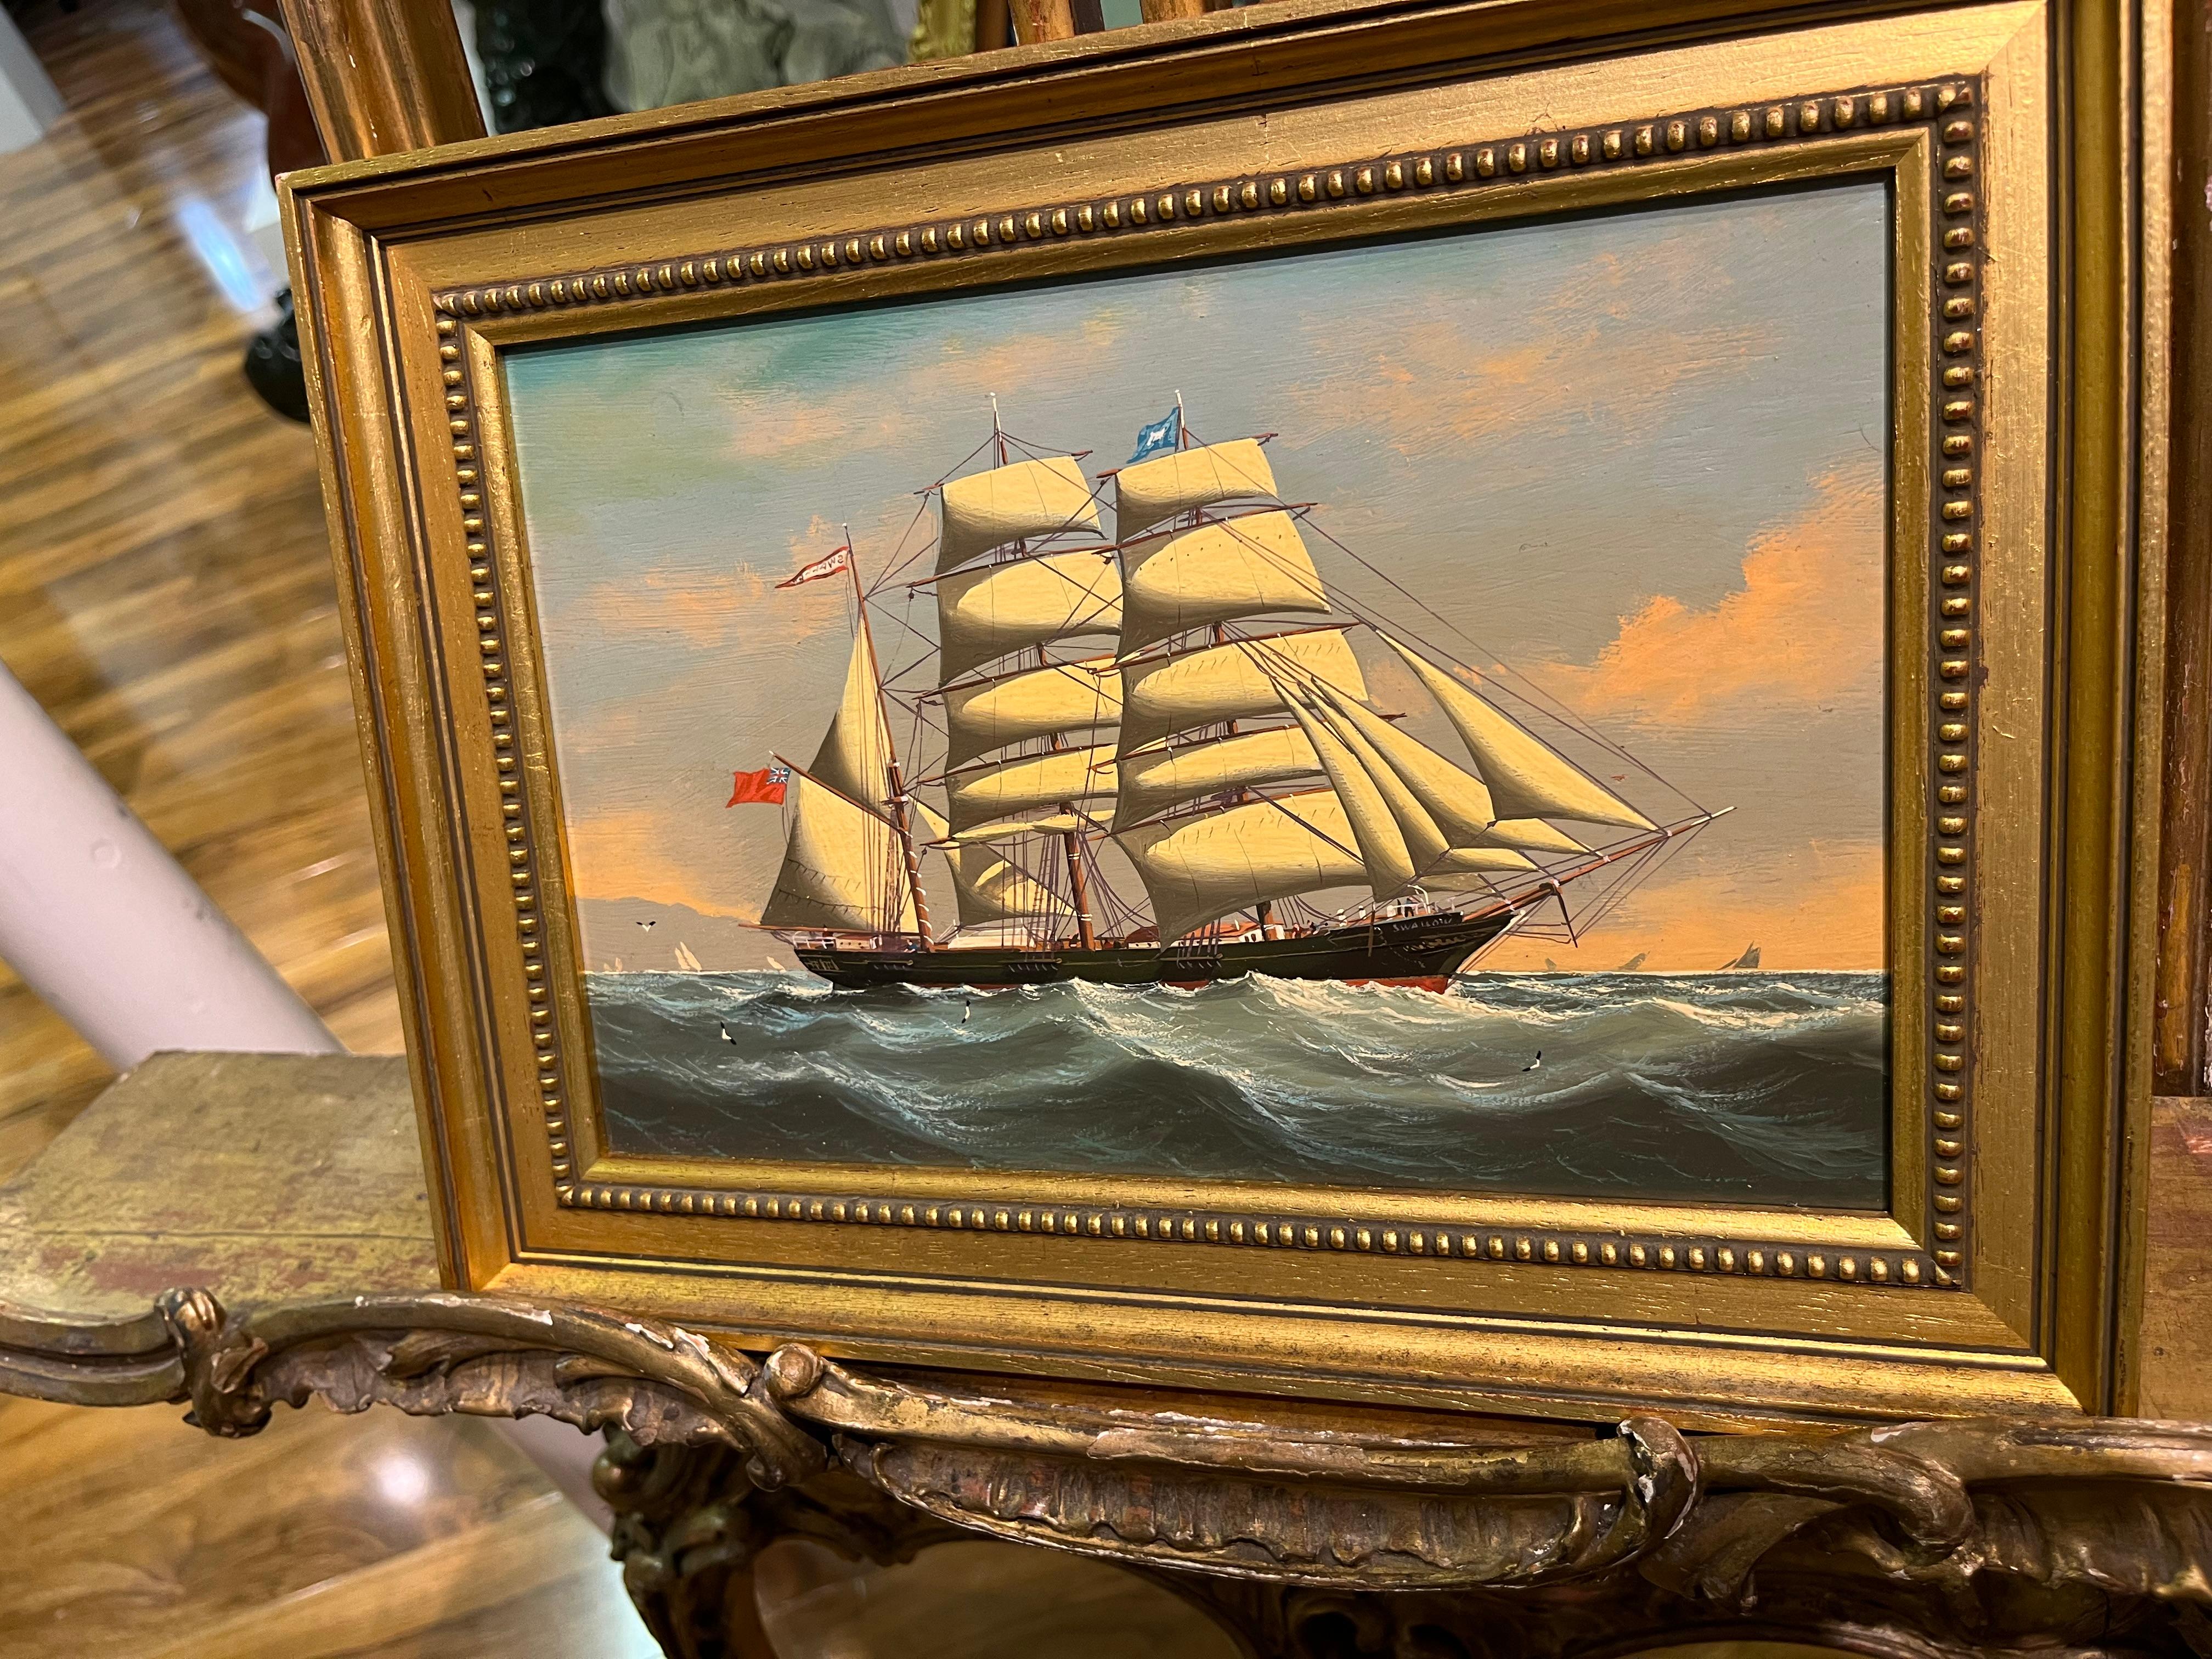 OIL PAINTING Small by SALVATORE COLACICCO (NAVY ADMIRALTY 20th CENTURY PIECE  - Brown Figurative Painting by Salvatore Colacicco